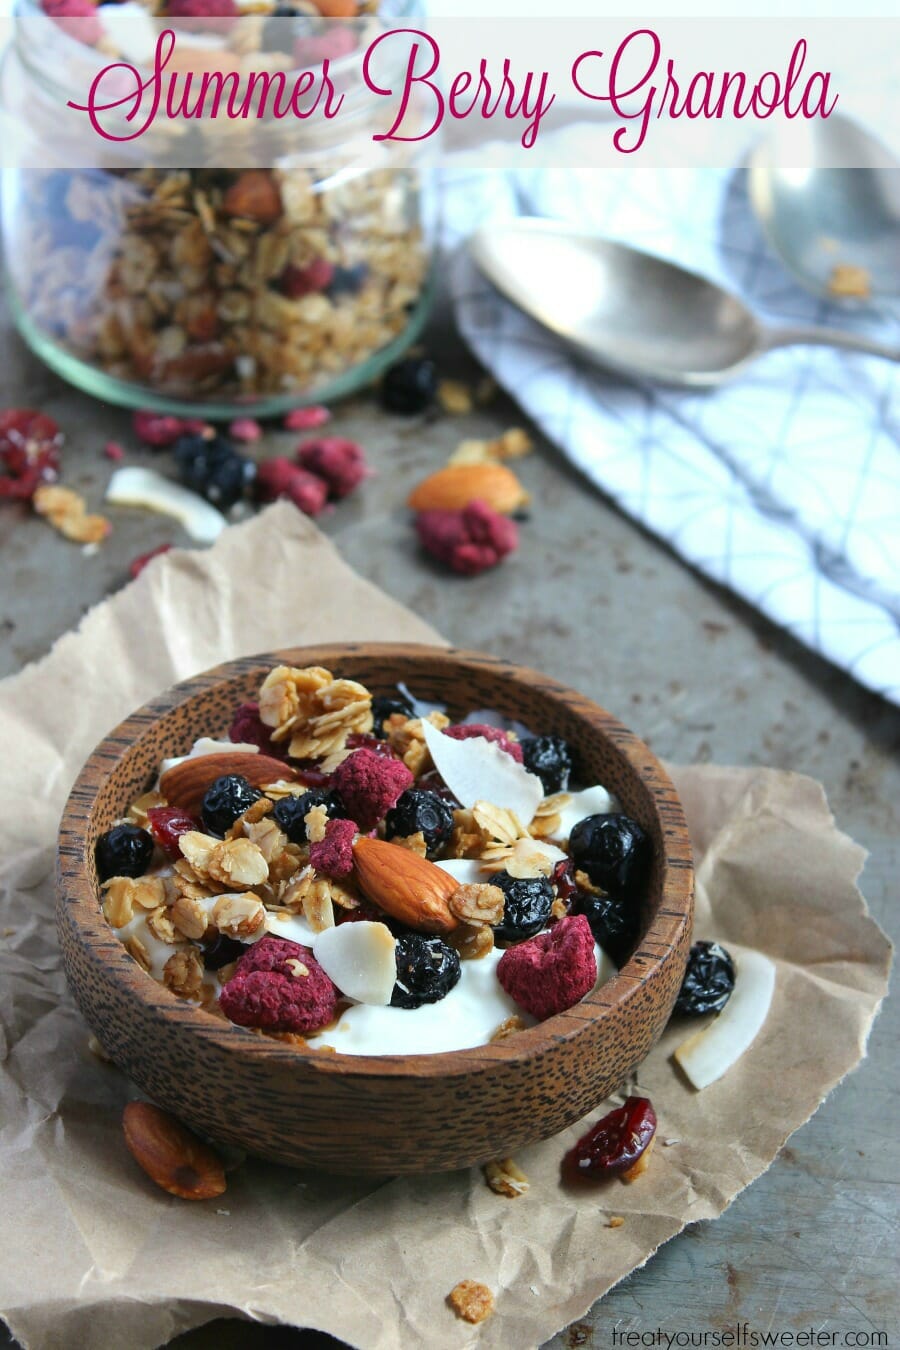 Toasted Summer Berry Granola; crispy, crunchy, sweet summer berry granola with oats and coconut. So delicious, you'll want to eat it by the handful!